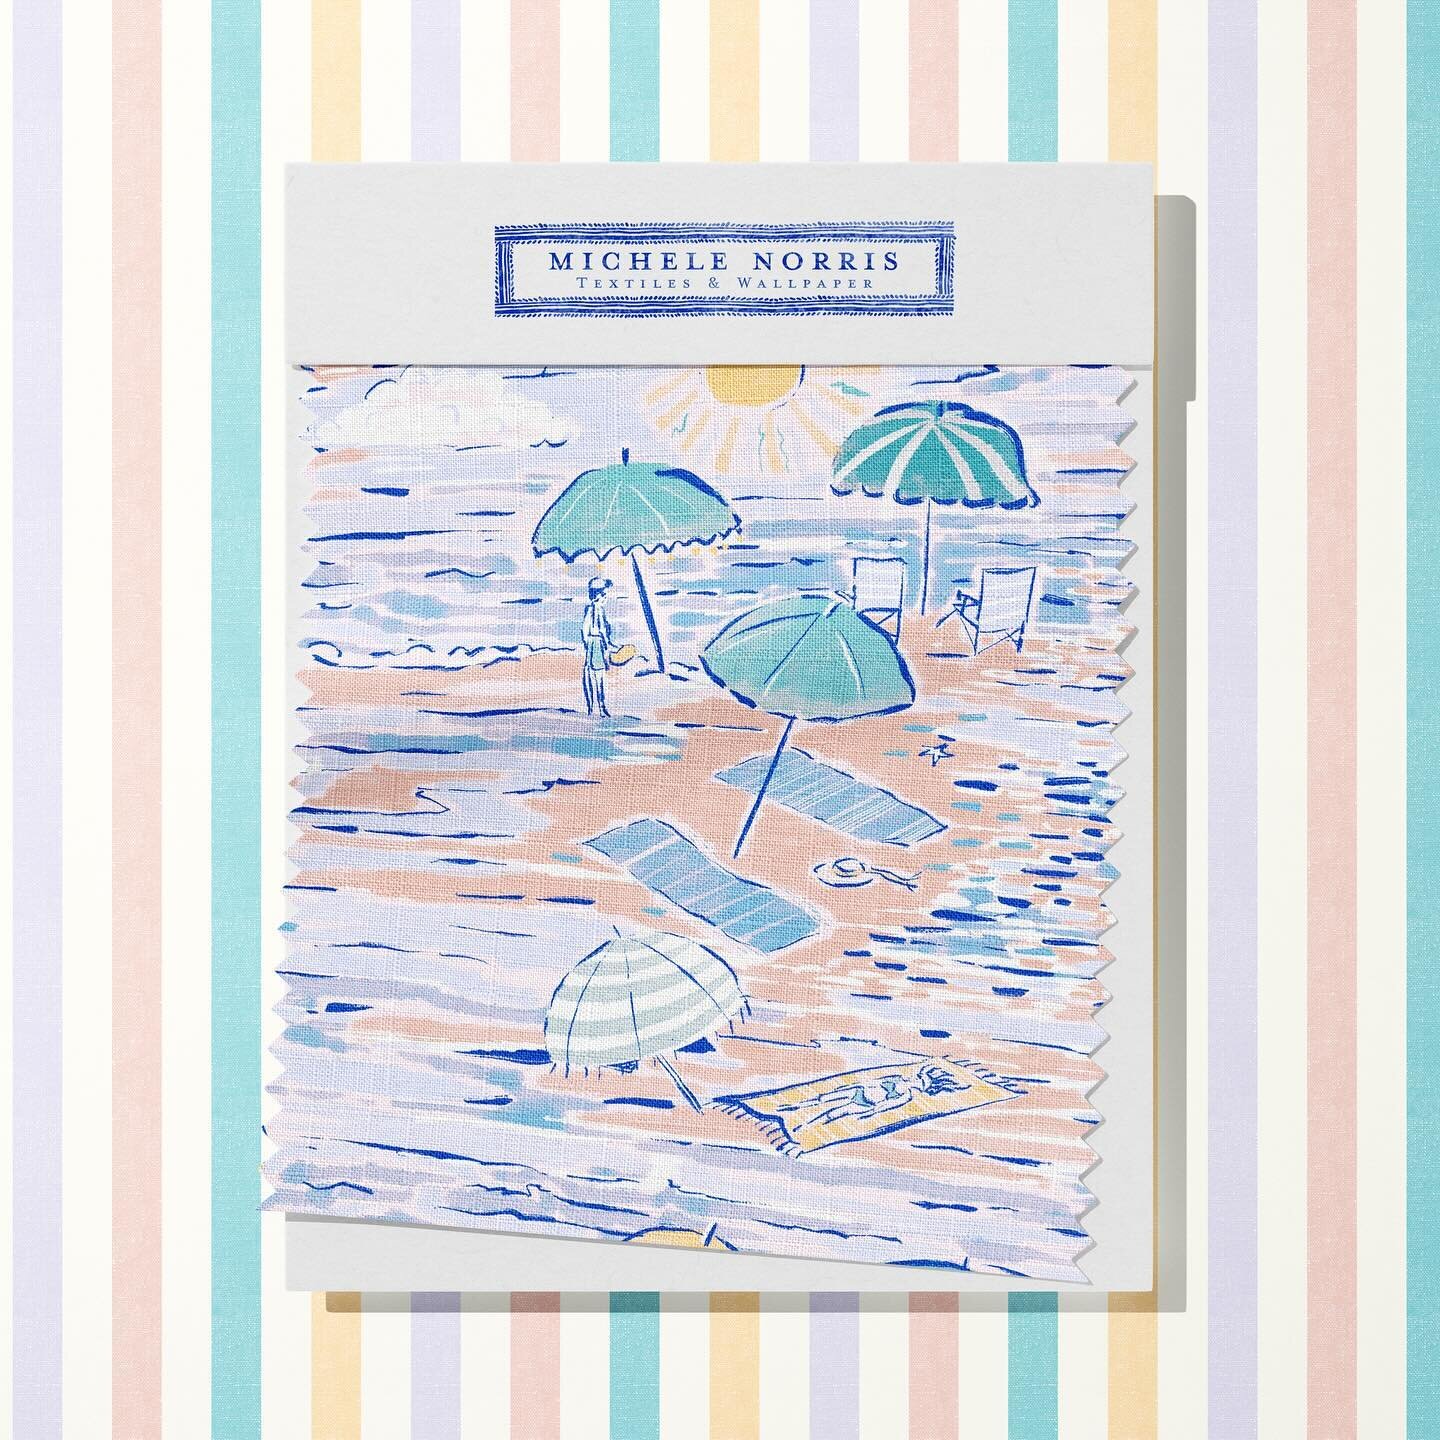 Who doesn&rsquo;t love a beach day? This new pattern - Riviera Beach Day - has all the warm summer vibes. 

.
.
.
#beachday #riviera #frenchriviera #whimsicalpattern #artdirector #interiors #beachhousedecor #cabana #poolhousedesign #summerpattern #pa